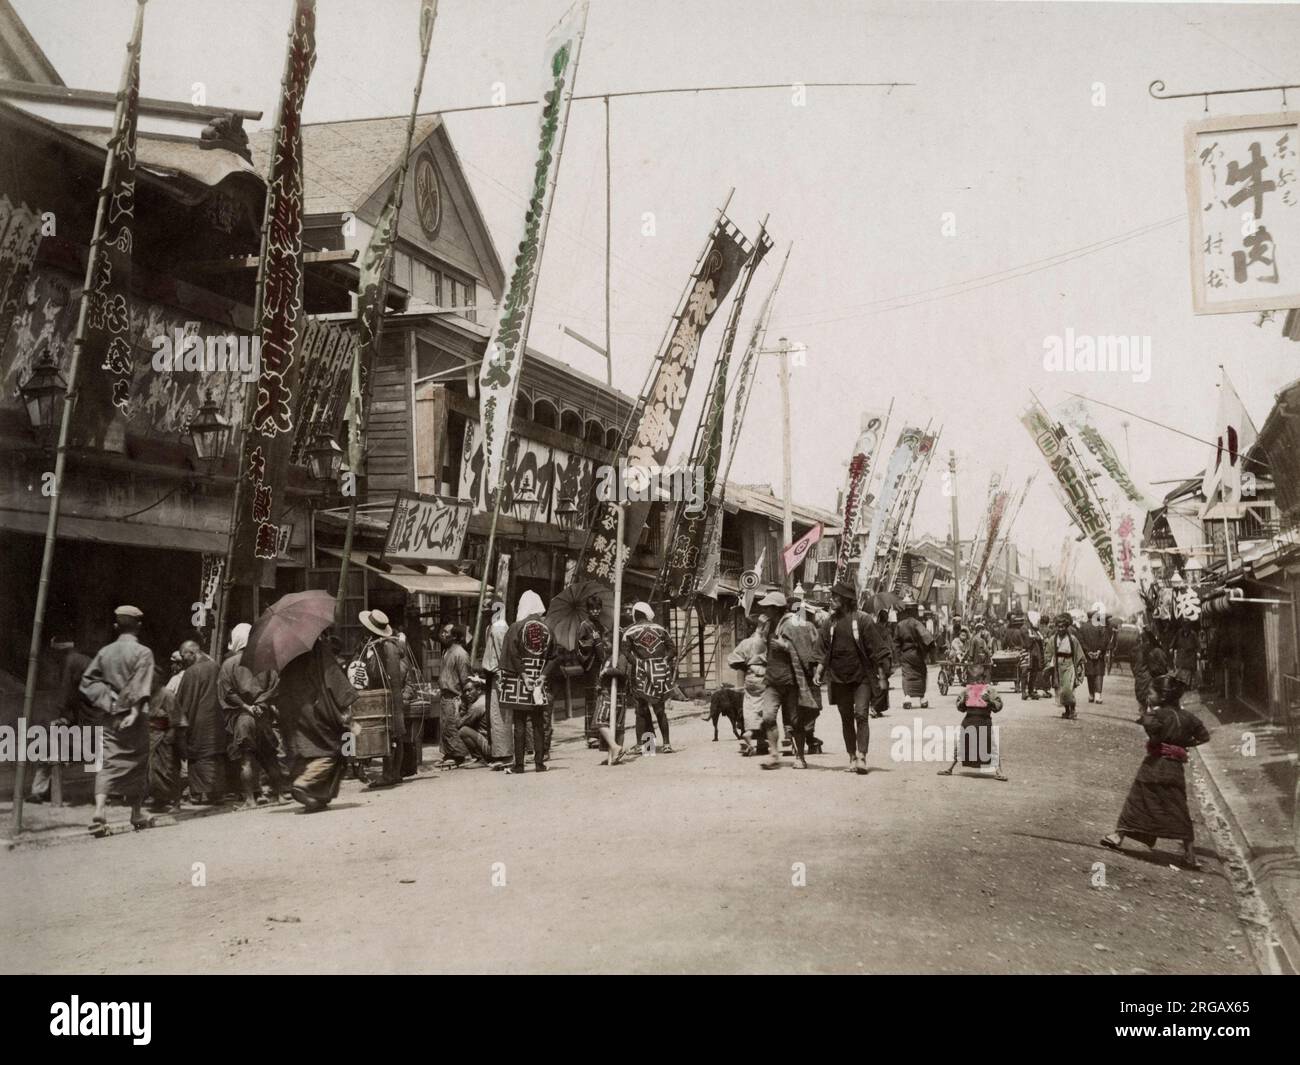 19th century vintage photograph - Isezakicho, Yokohama, Japan. Now a high-energy shopping district Isezakicho centers on Isezaki Mall, an outdoor pedestrian arcade with mainstream boutiques and department stores. Image c.1880's. Stock Photo